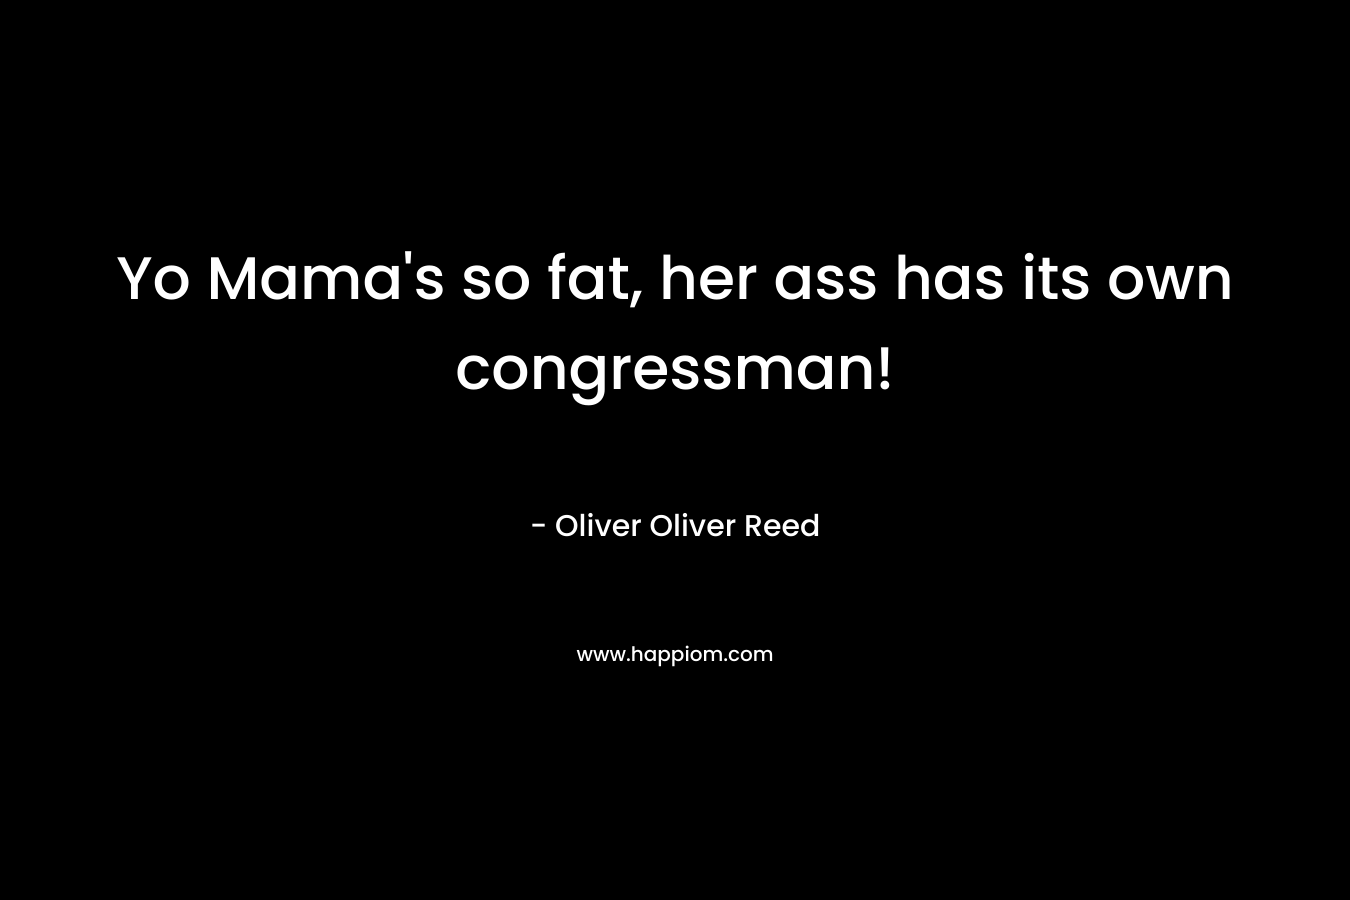 Yo Mama’s so fat, her ass has its own congressman! – Oliver Oliver Reed